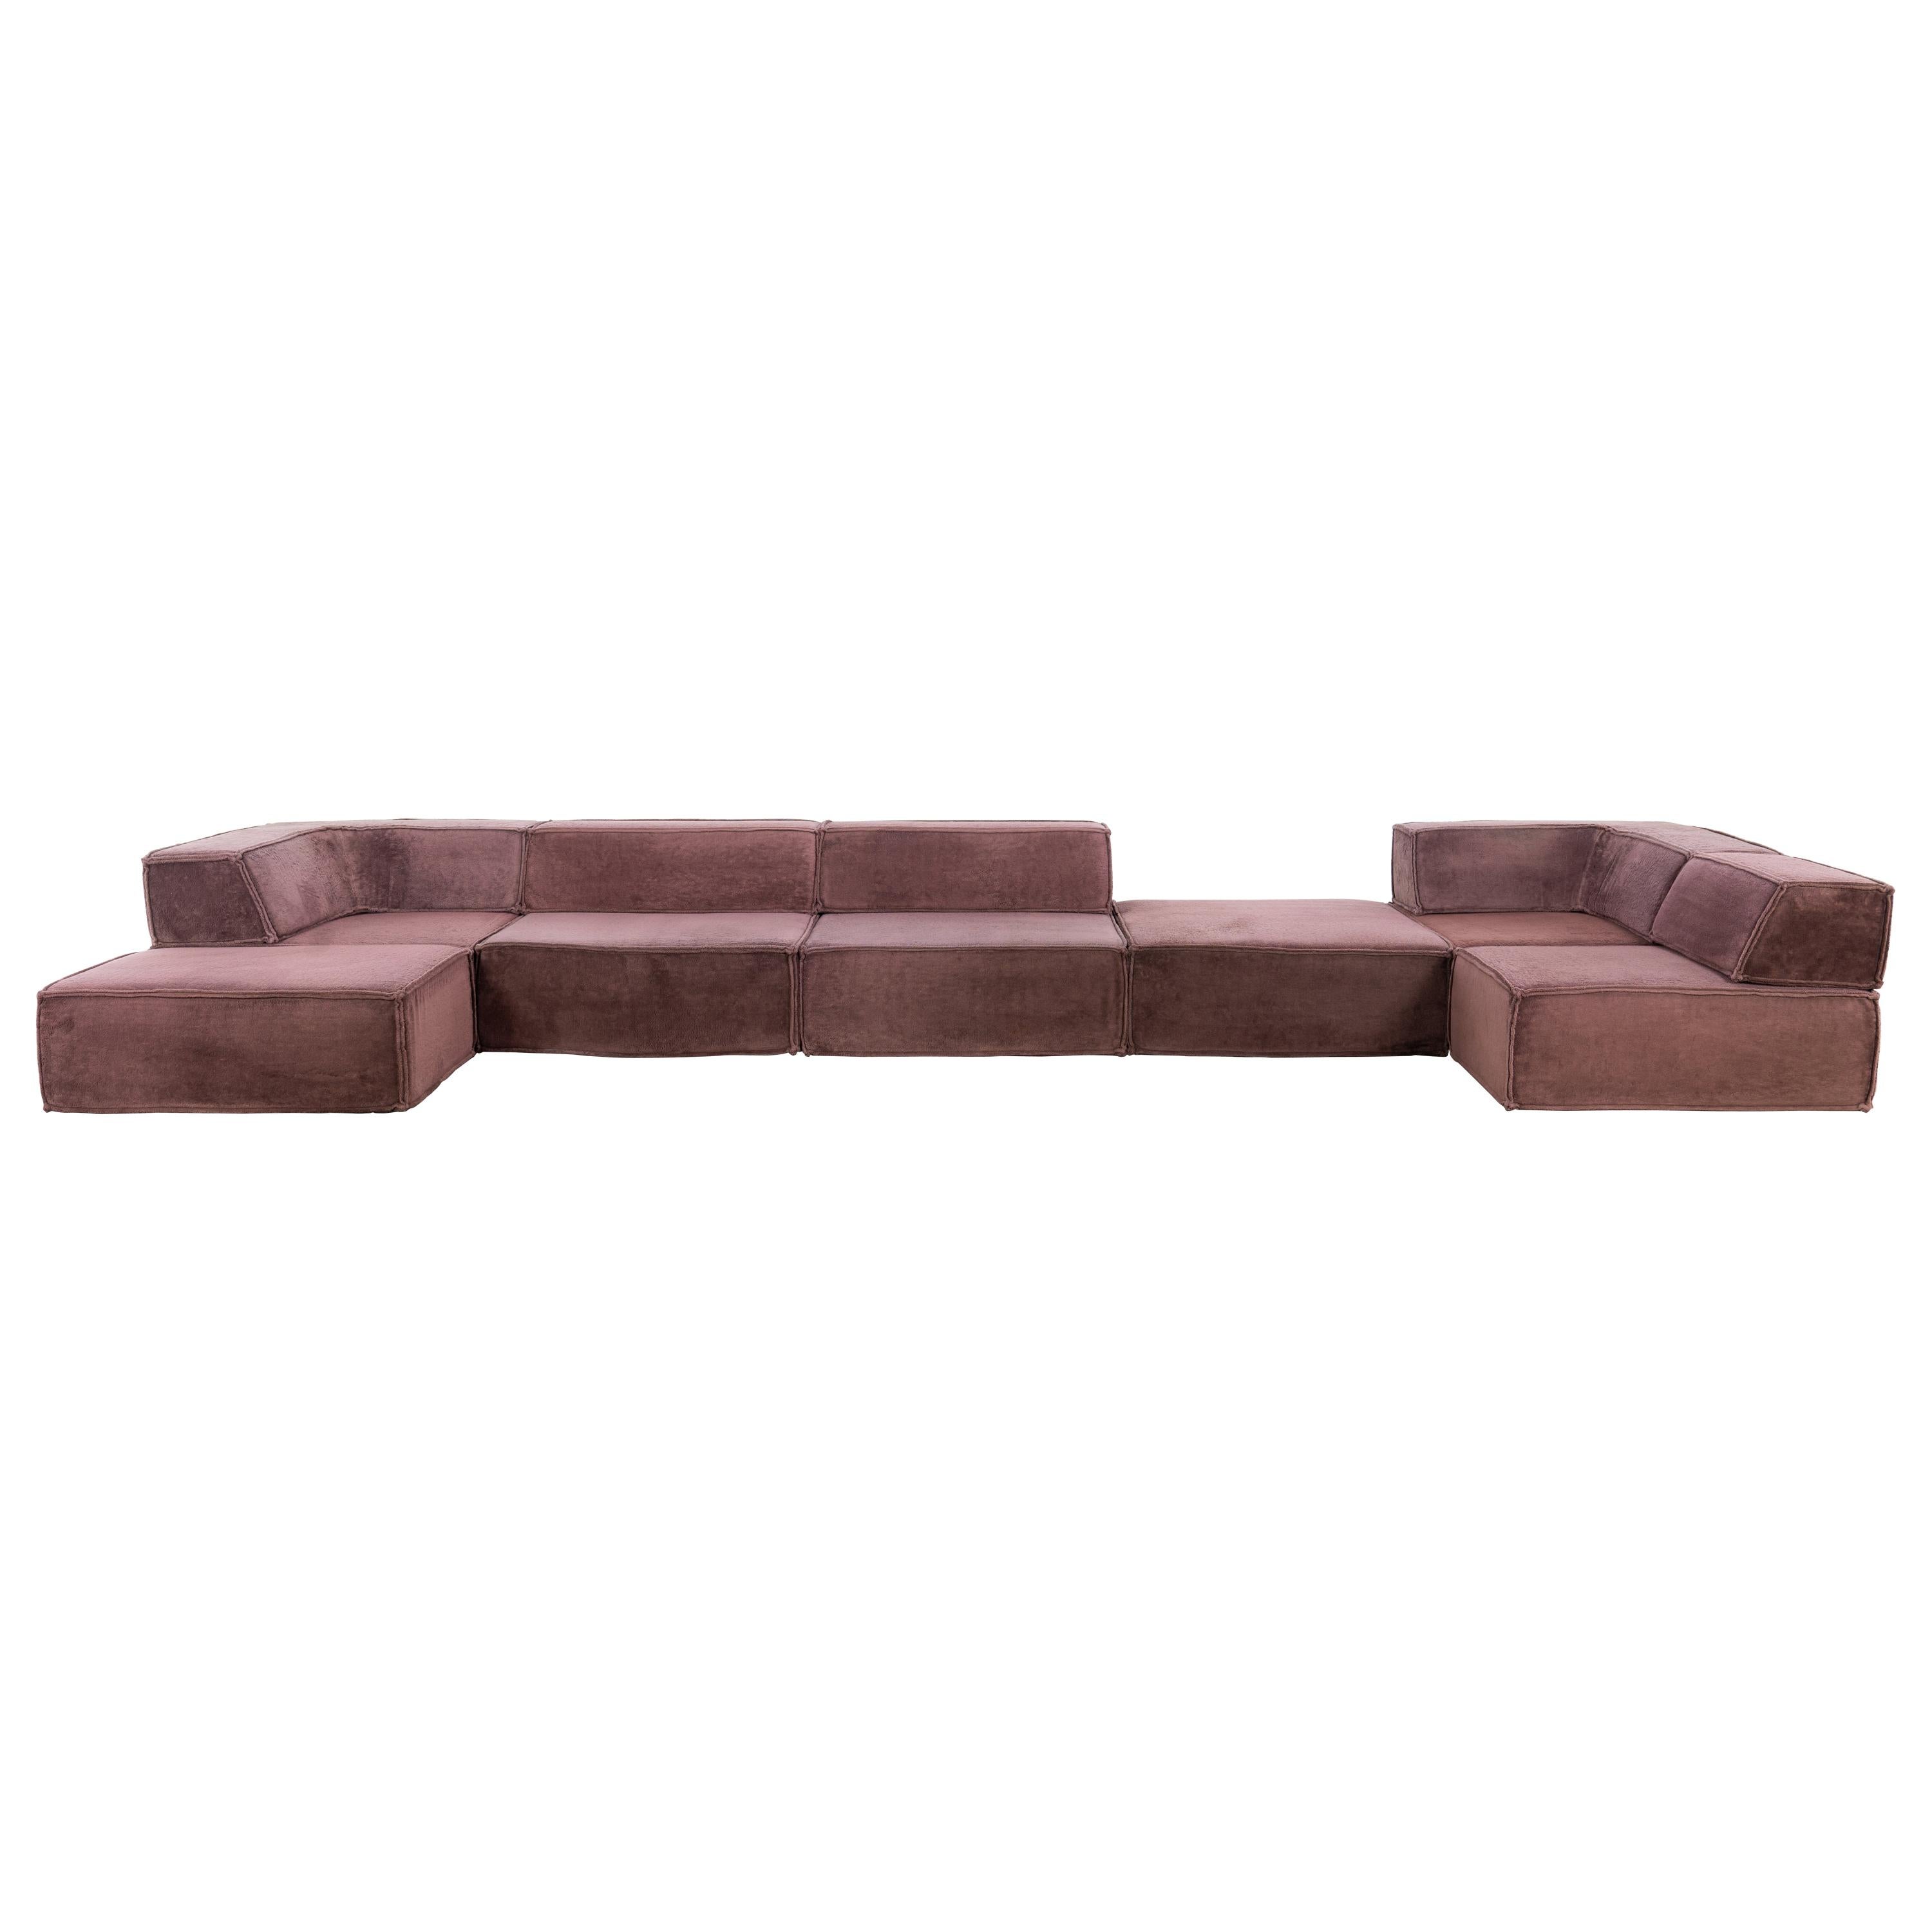 COR Trio Modular Sofa, Giant Landscape in Brown, 1972 by Team Form AG, Swiss